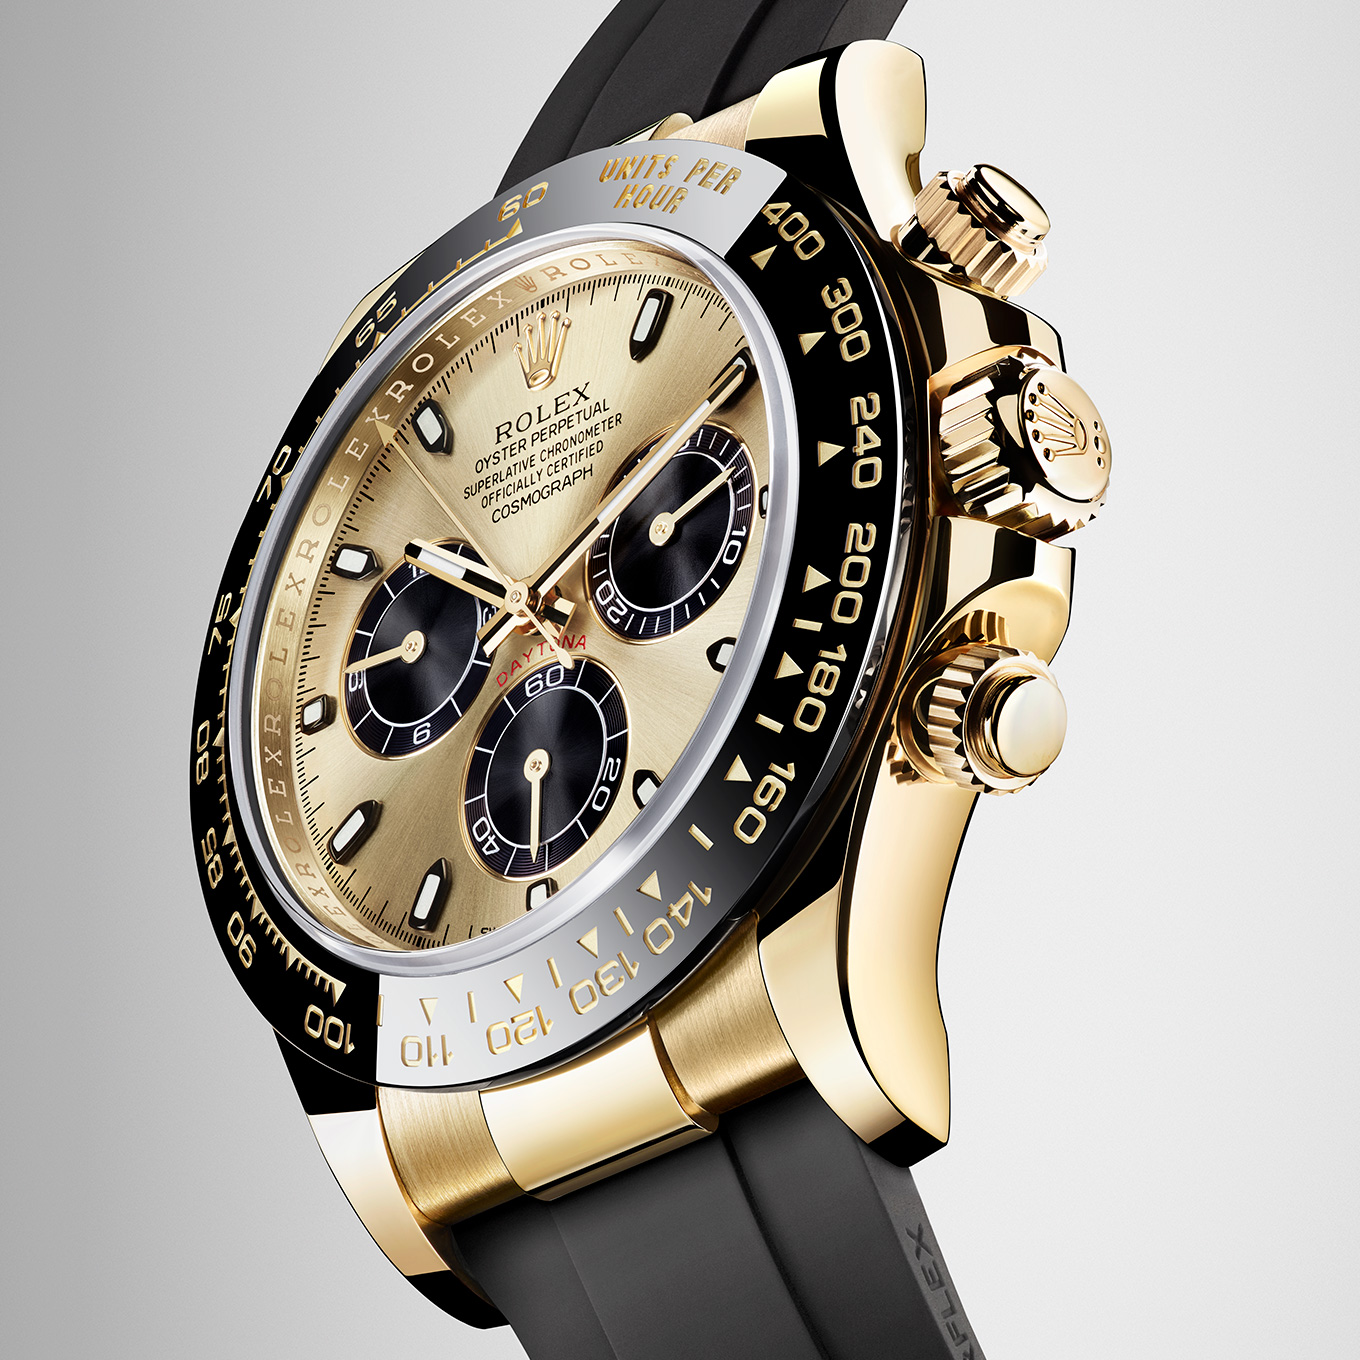 Rolex Daytona - Heritage Paul Newman refined by EMBER CONCEPT